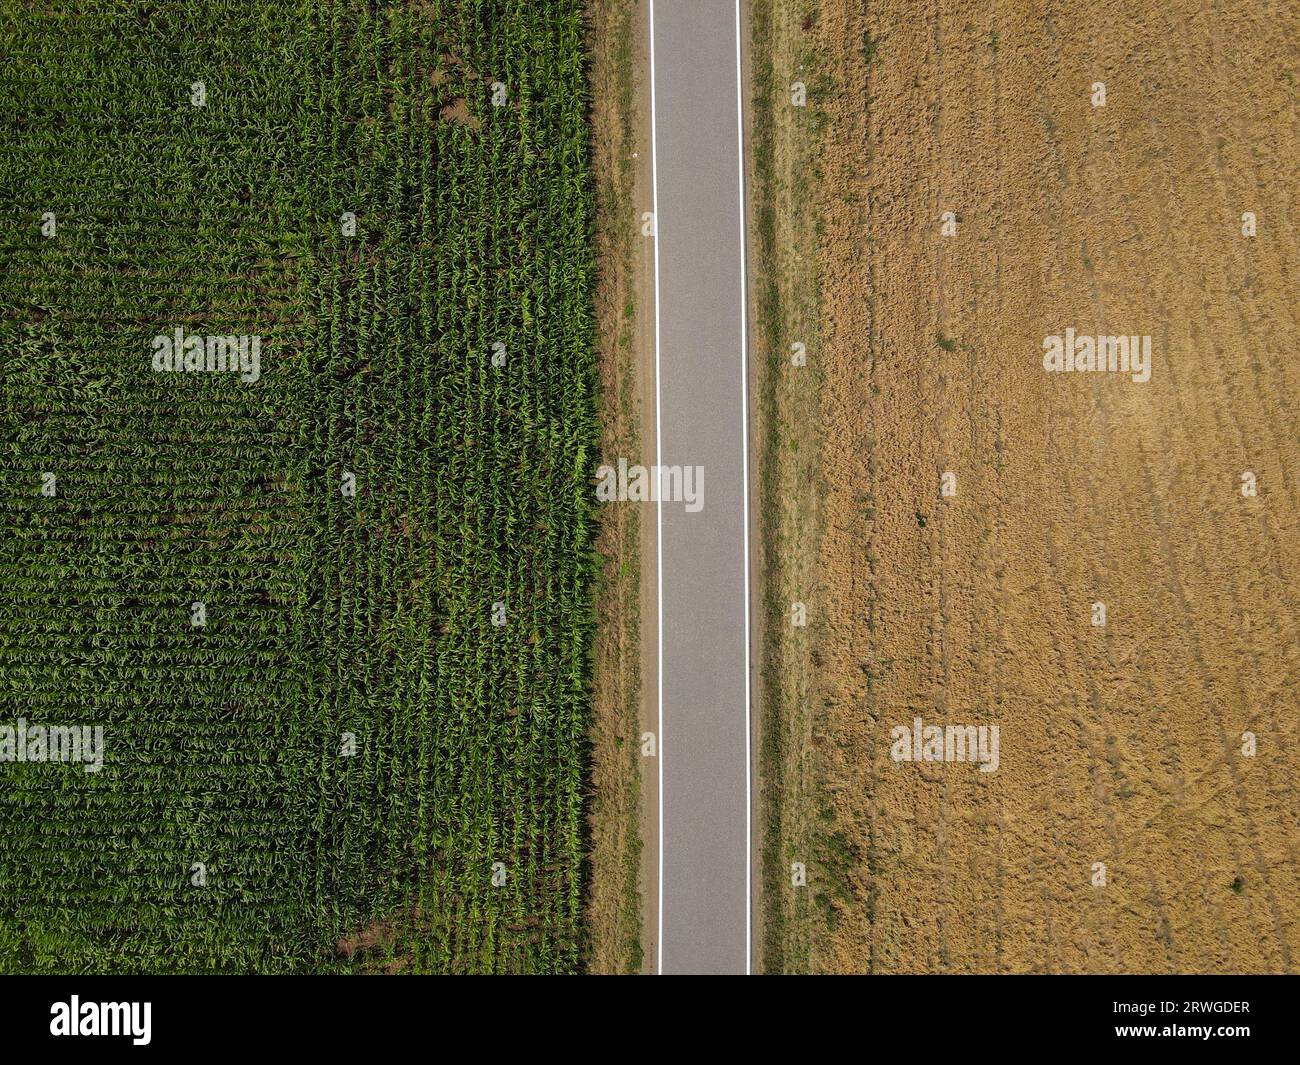 Aerial view of a road between crop and corn fields in the countryside Stock Photo